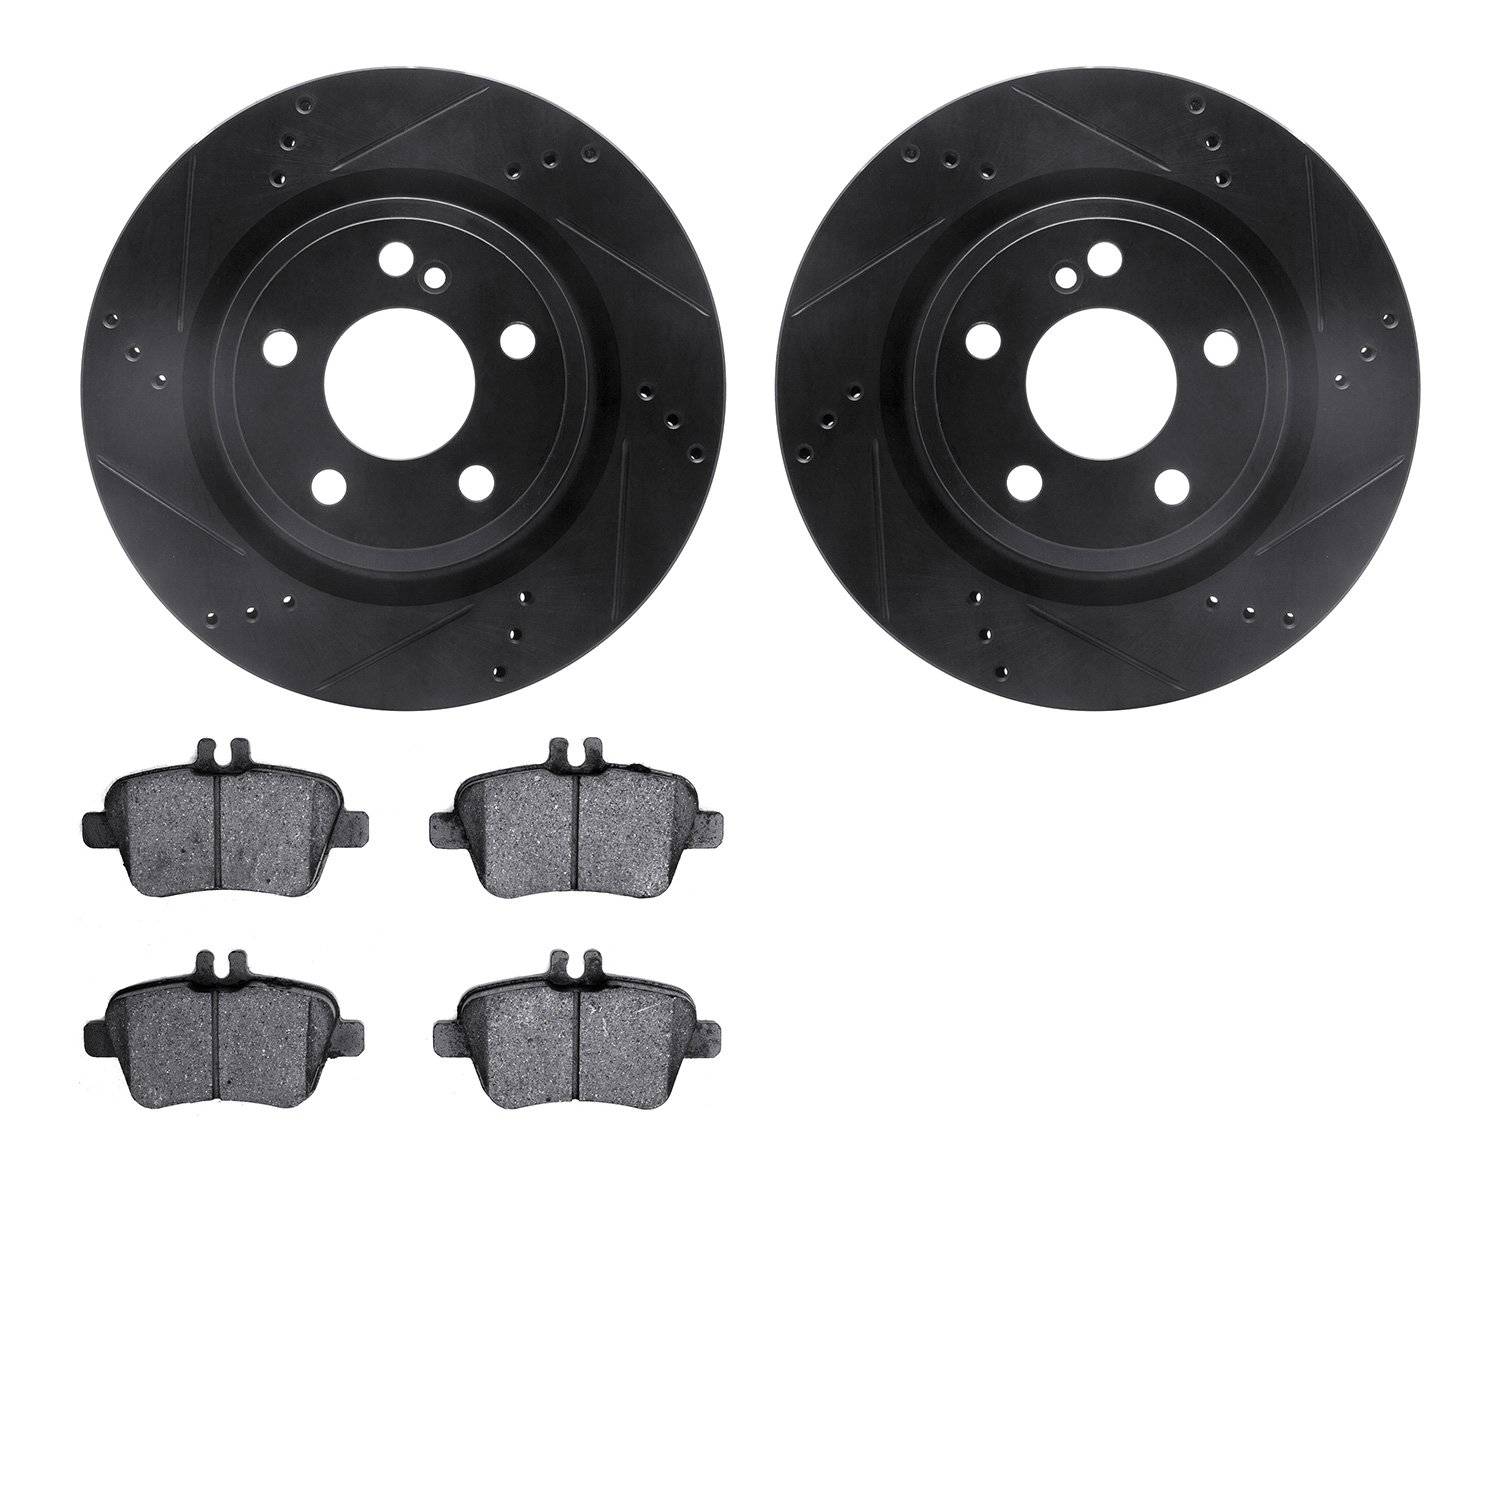 8302-63137 Drilled/Slotted Brake Rotors with 3000-Series Ceramic Brake Pads Kit [Black], 2014-2019 Mercedes-Benz, Position: Rear